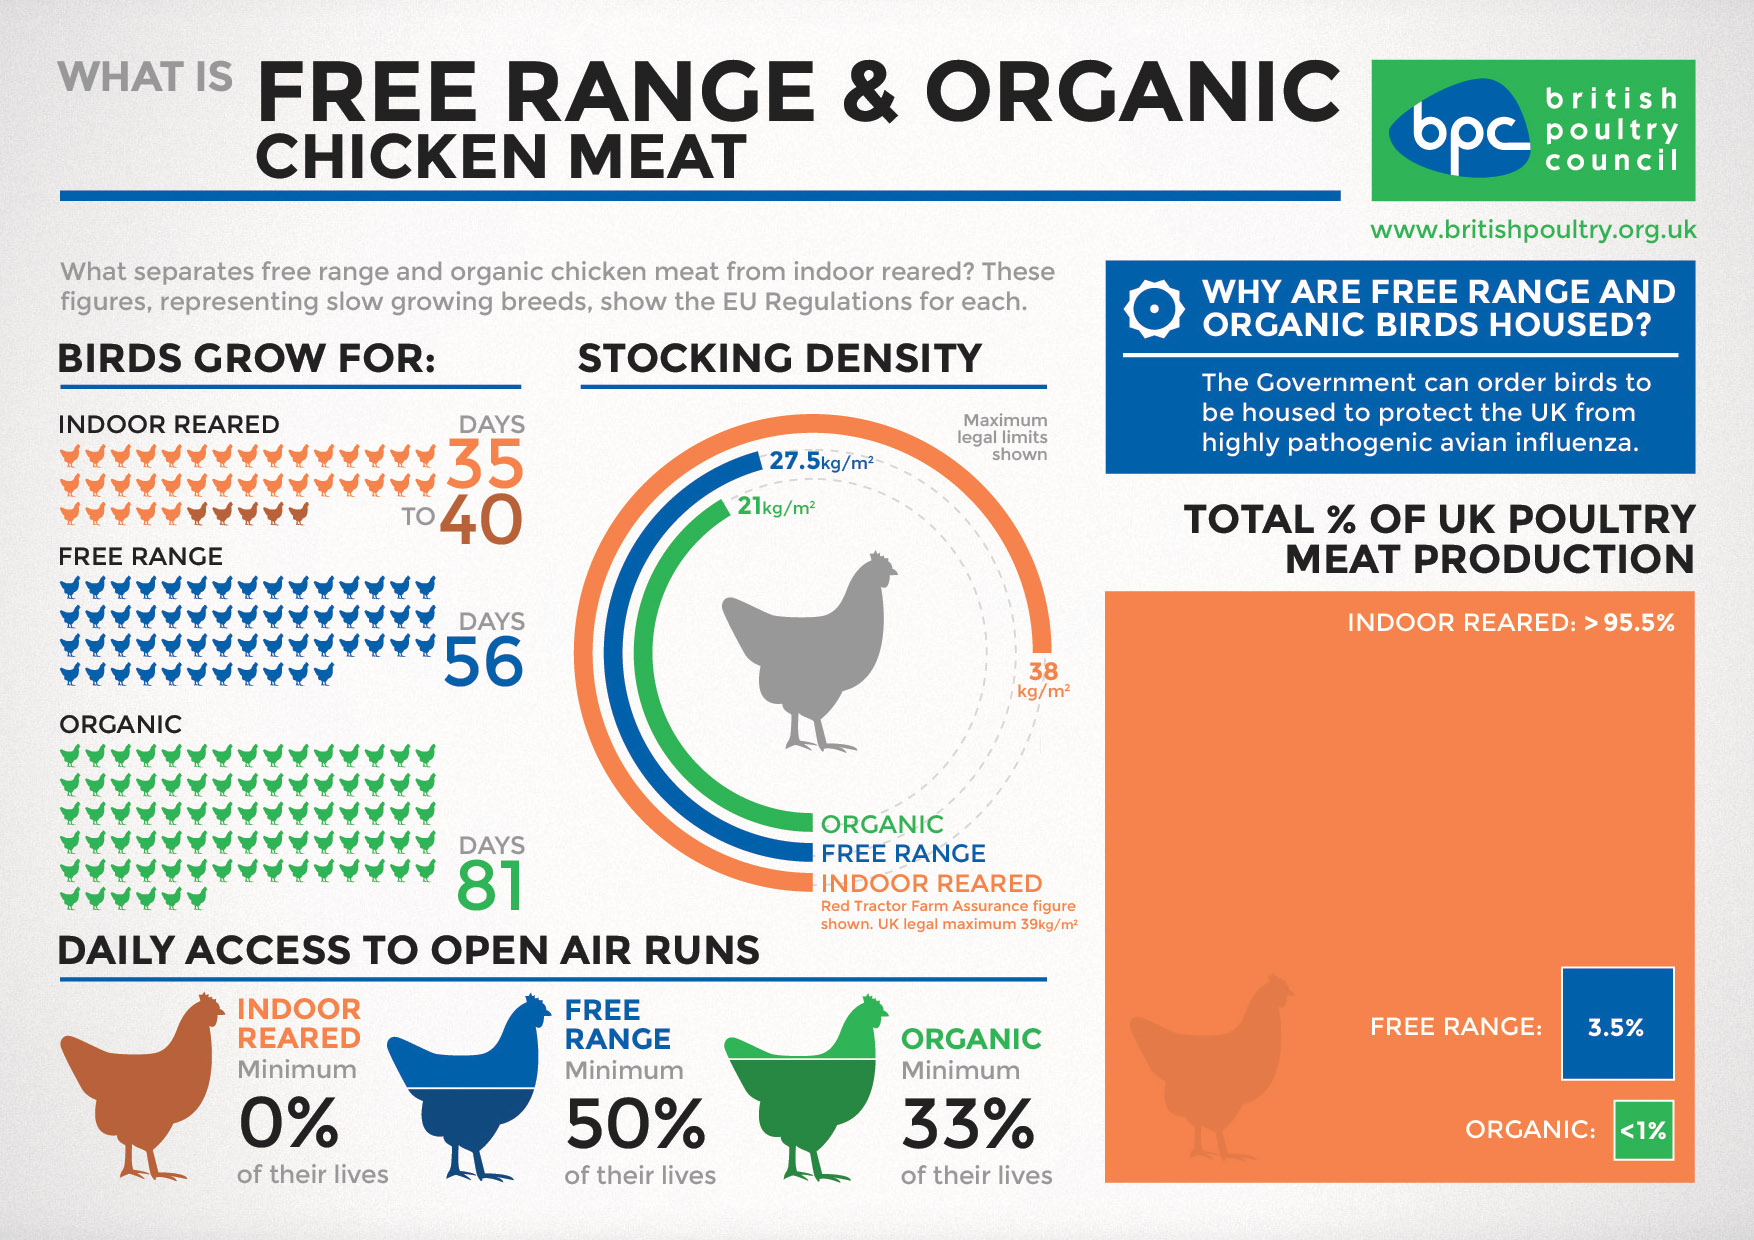 What is Free Range and Organic Chicken Meat?